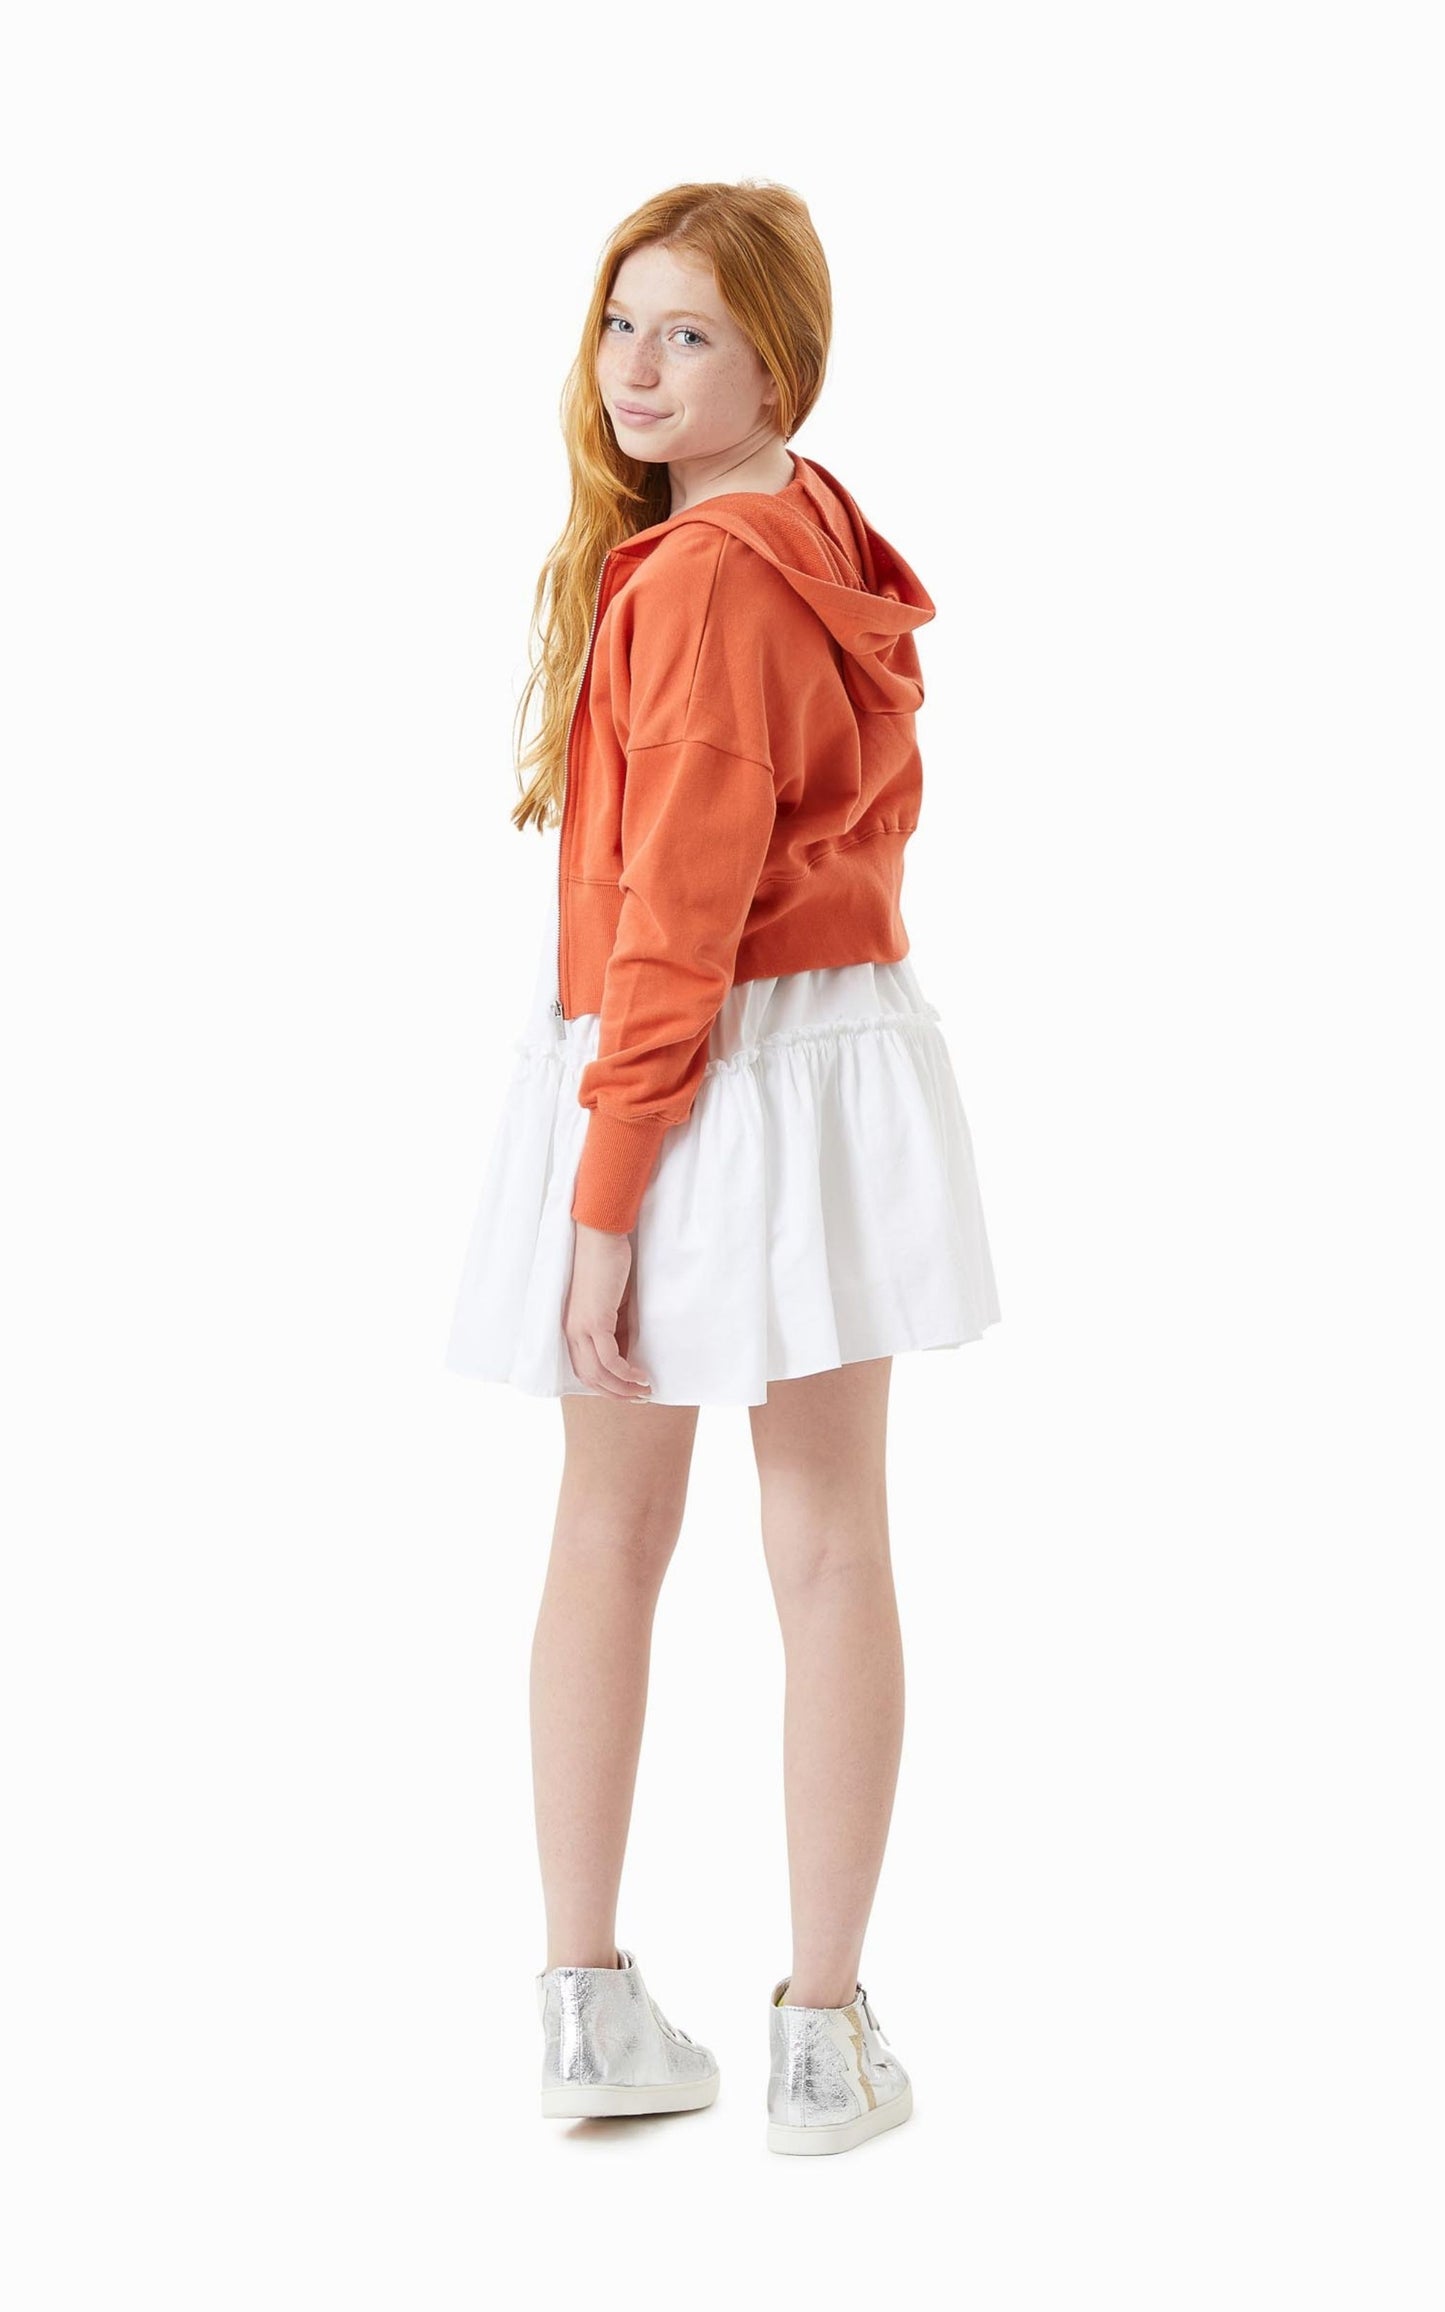 Pre-teen Child in a White Mid-Thigh Summer Dress and Orange Zip up hoodie 